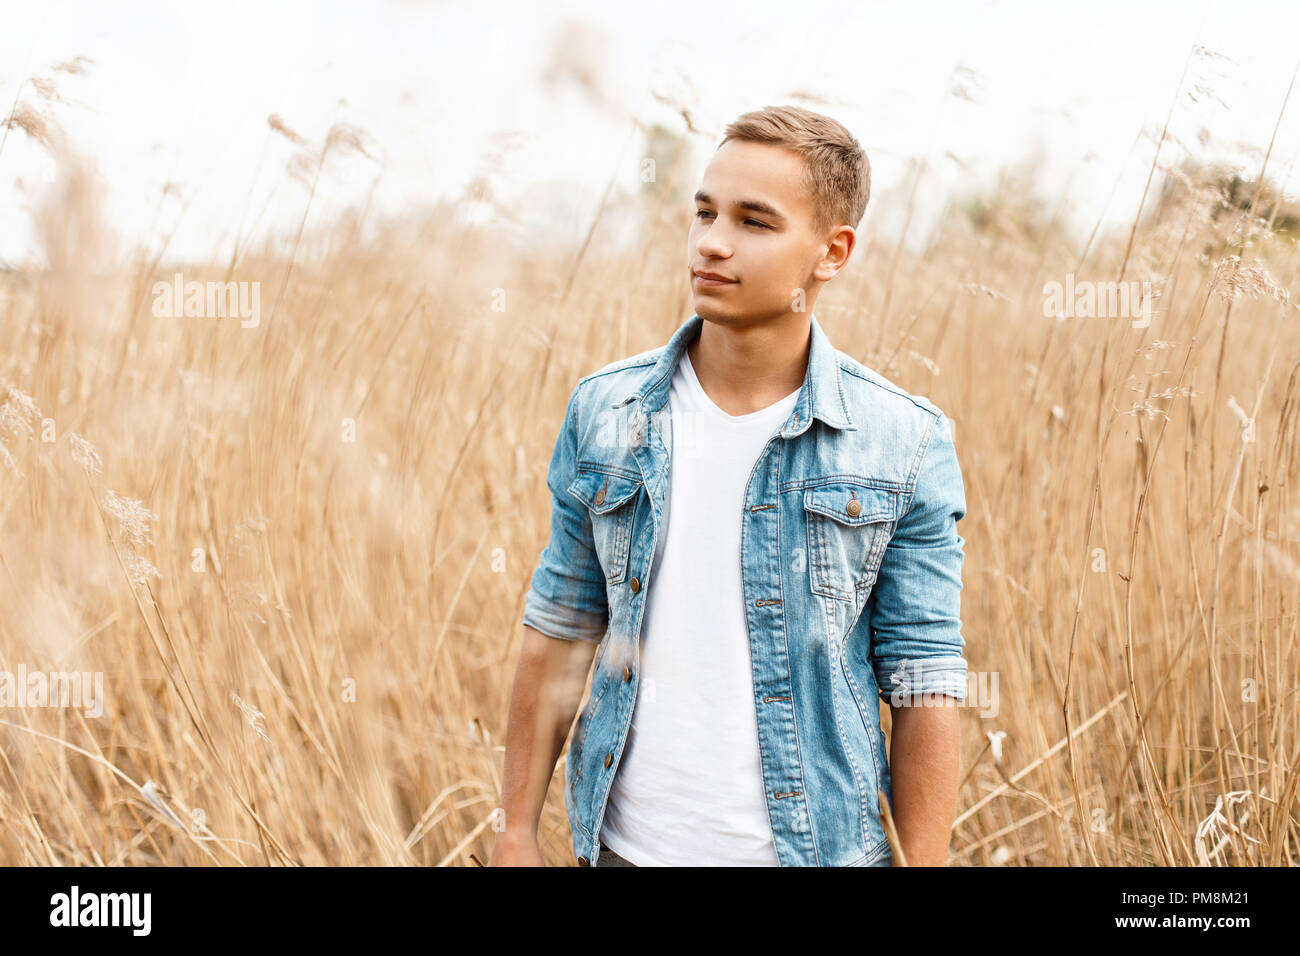 Handsome young man in a jeans jacket in a white T-shirt is walking outdoors in the grass Stock Photo